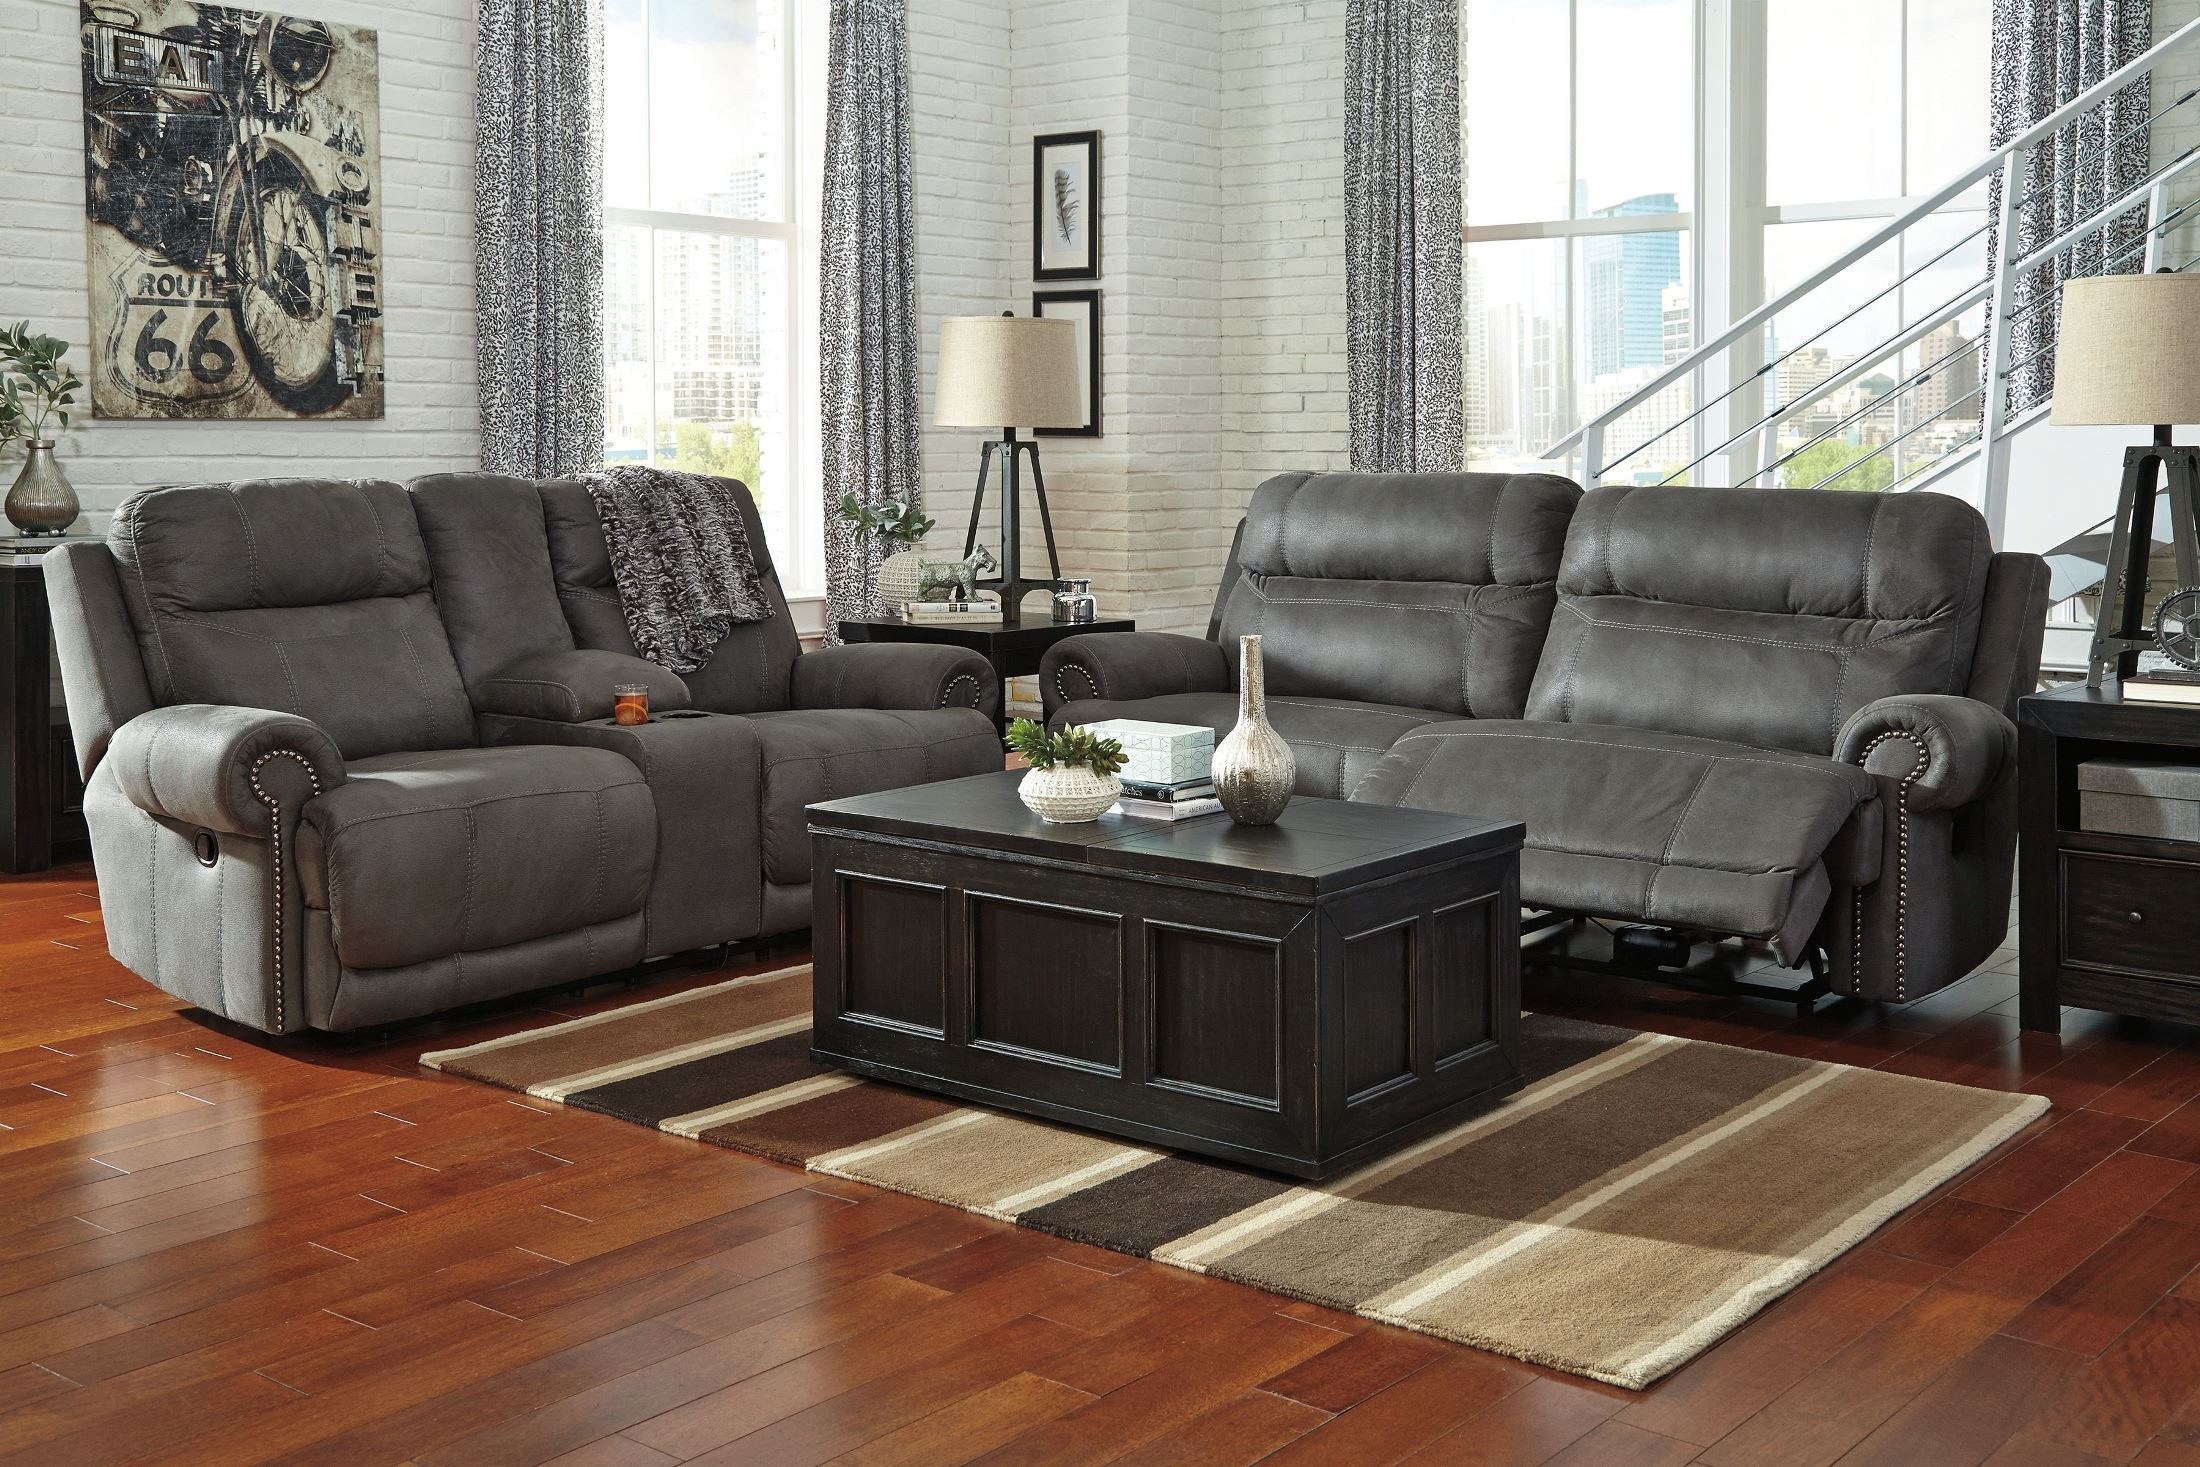 Living Room Recliner Chair
 Austere Gray Power Reclining Living Room Set from Ashley